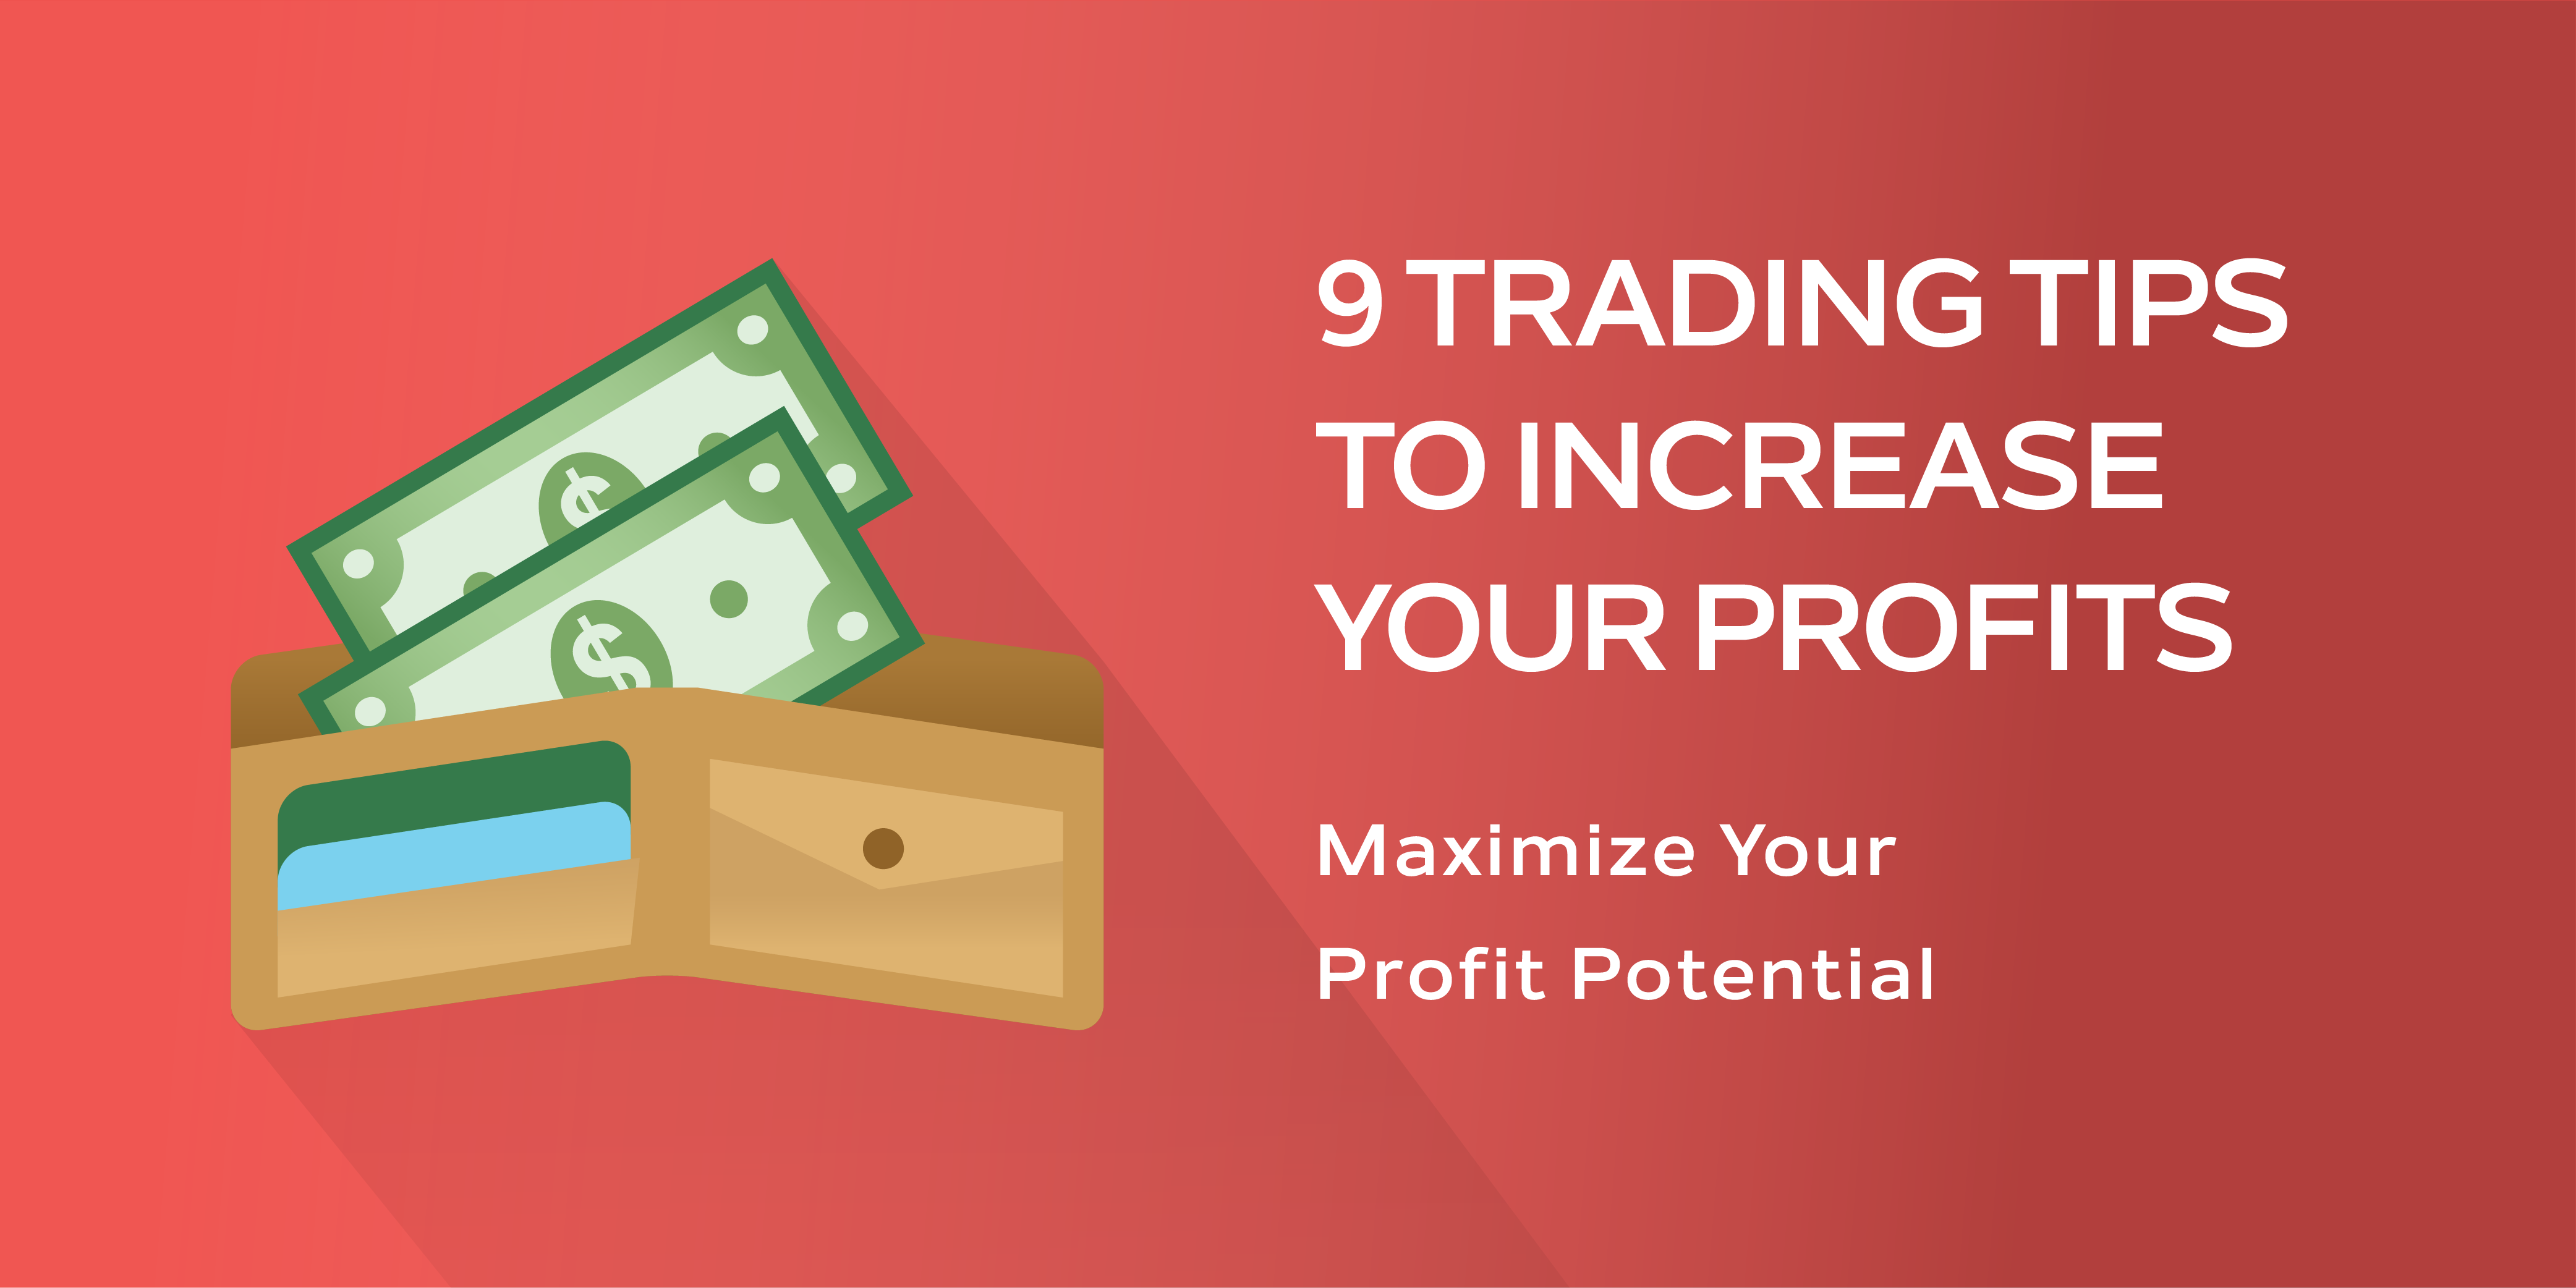 Investing Shortcuts - 9 Trading Tips to Increase Your Profits